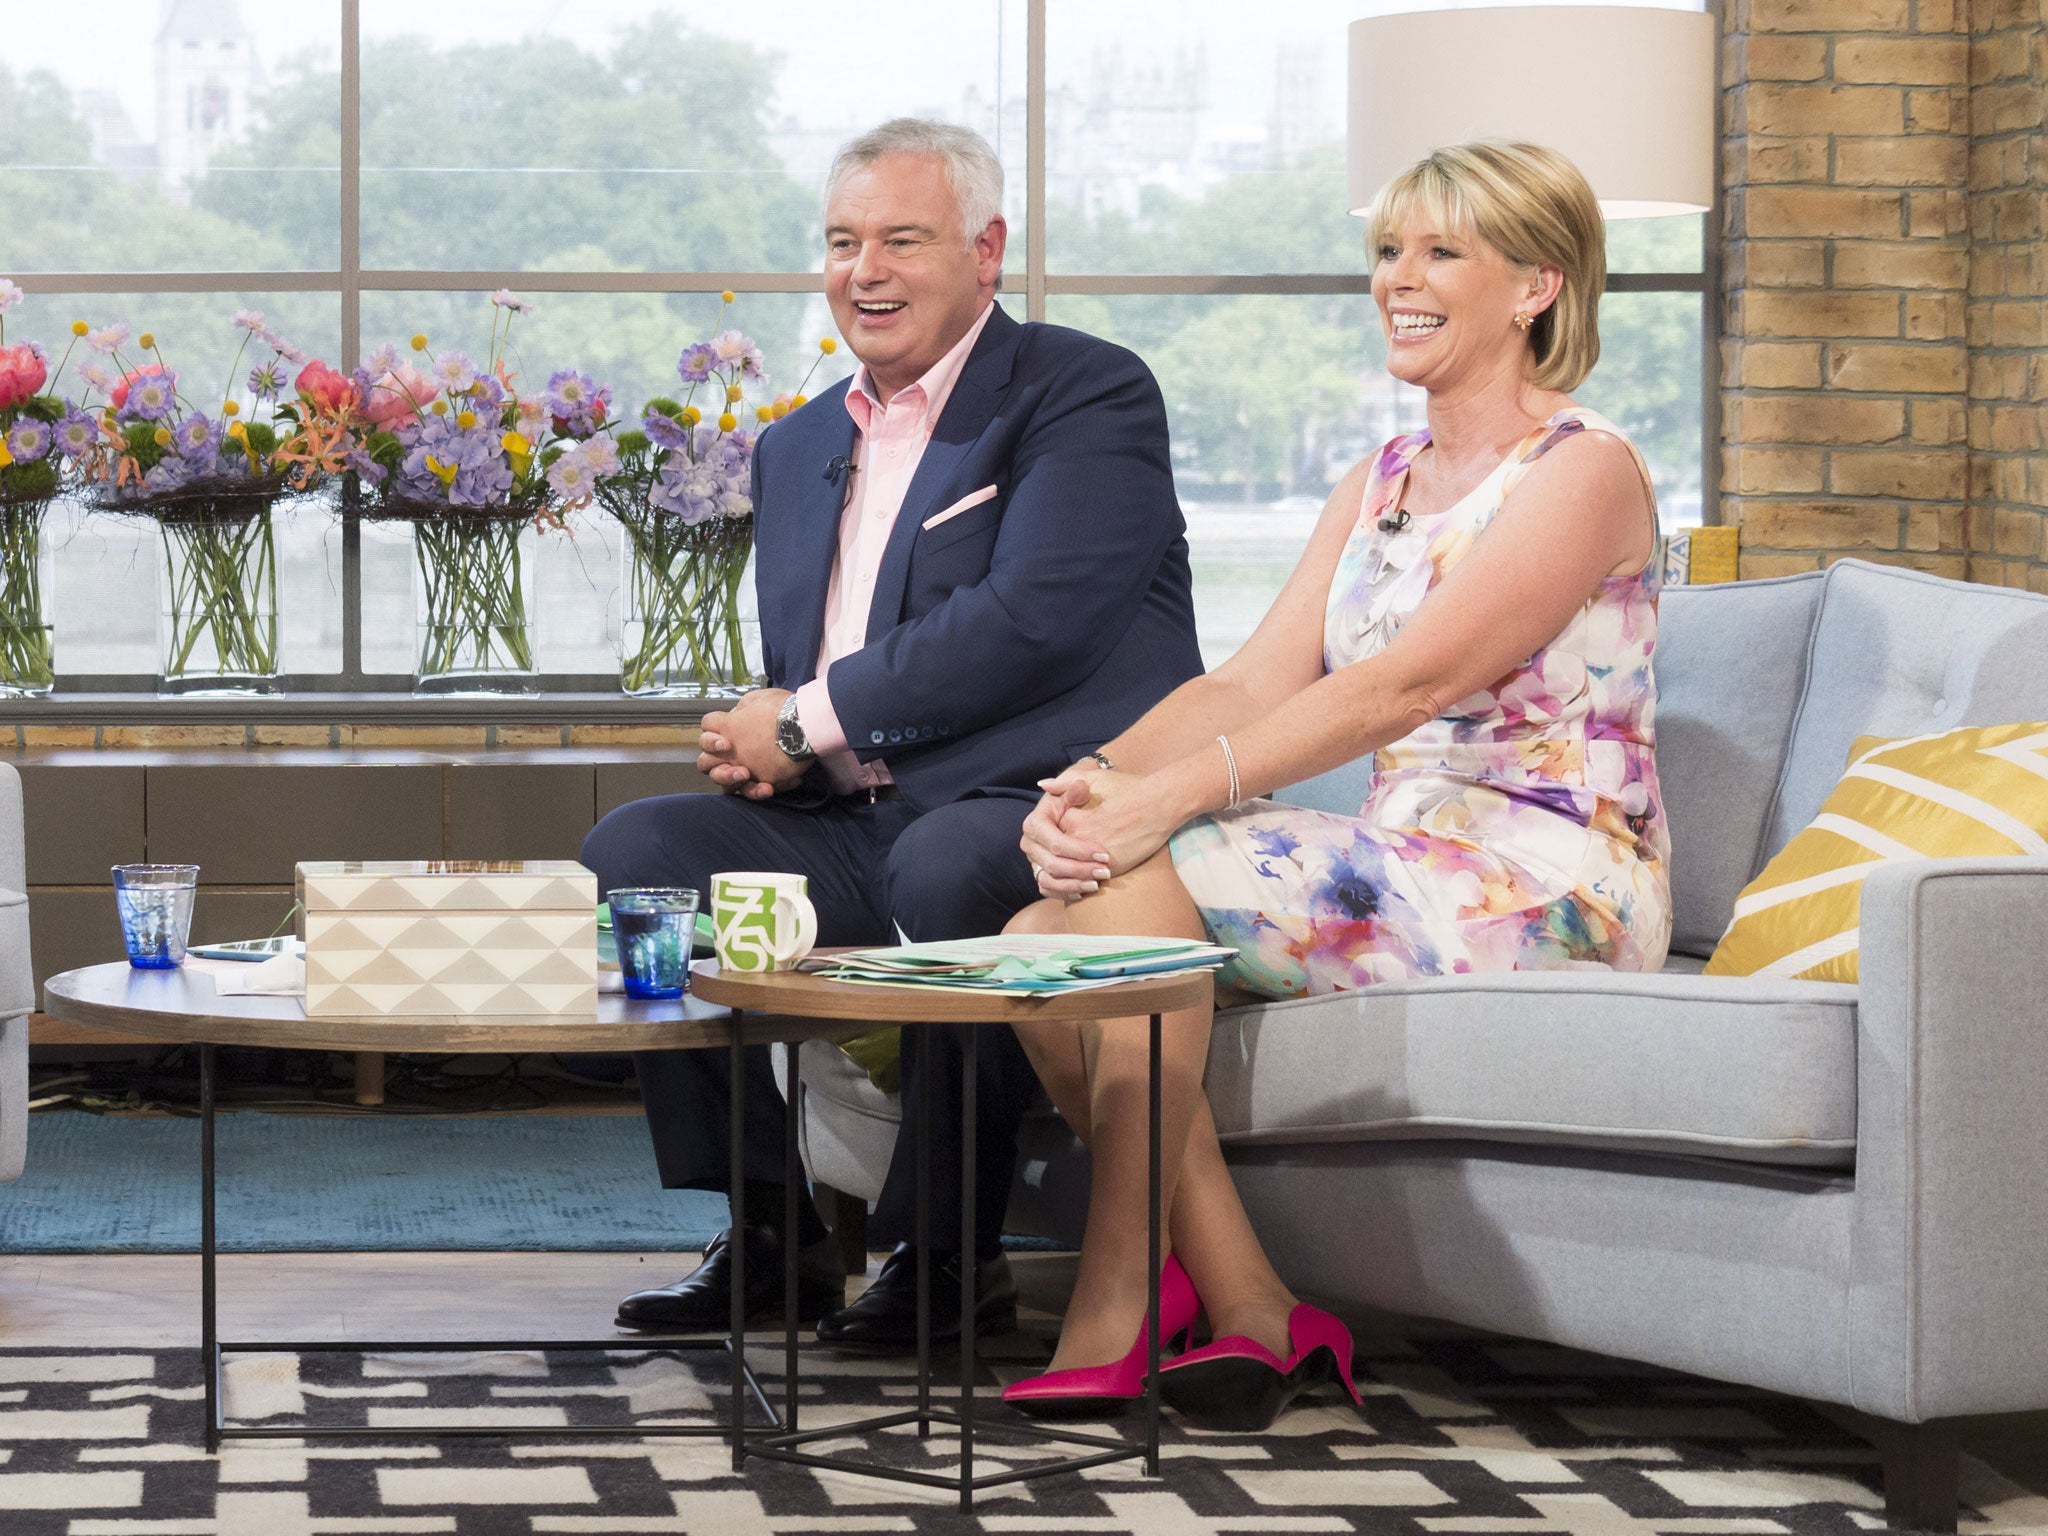 Eamonn Holmes was caught apparently flicking the V-sign at a cameraman during a live broadcast